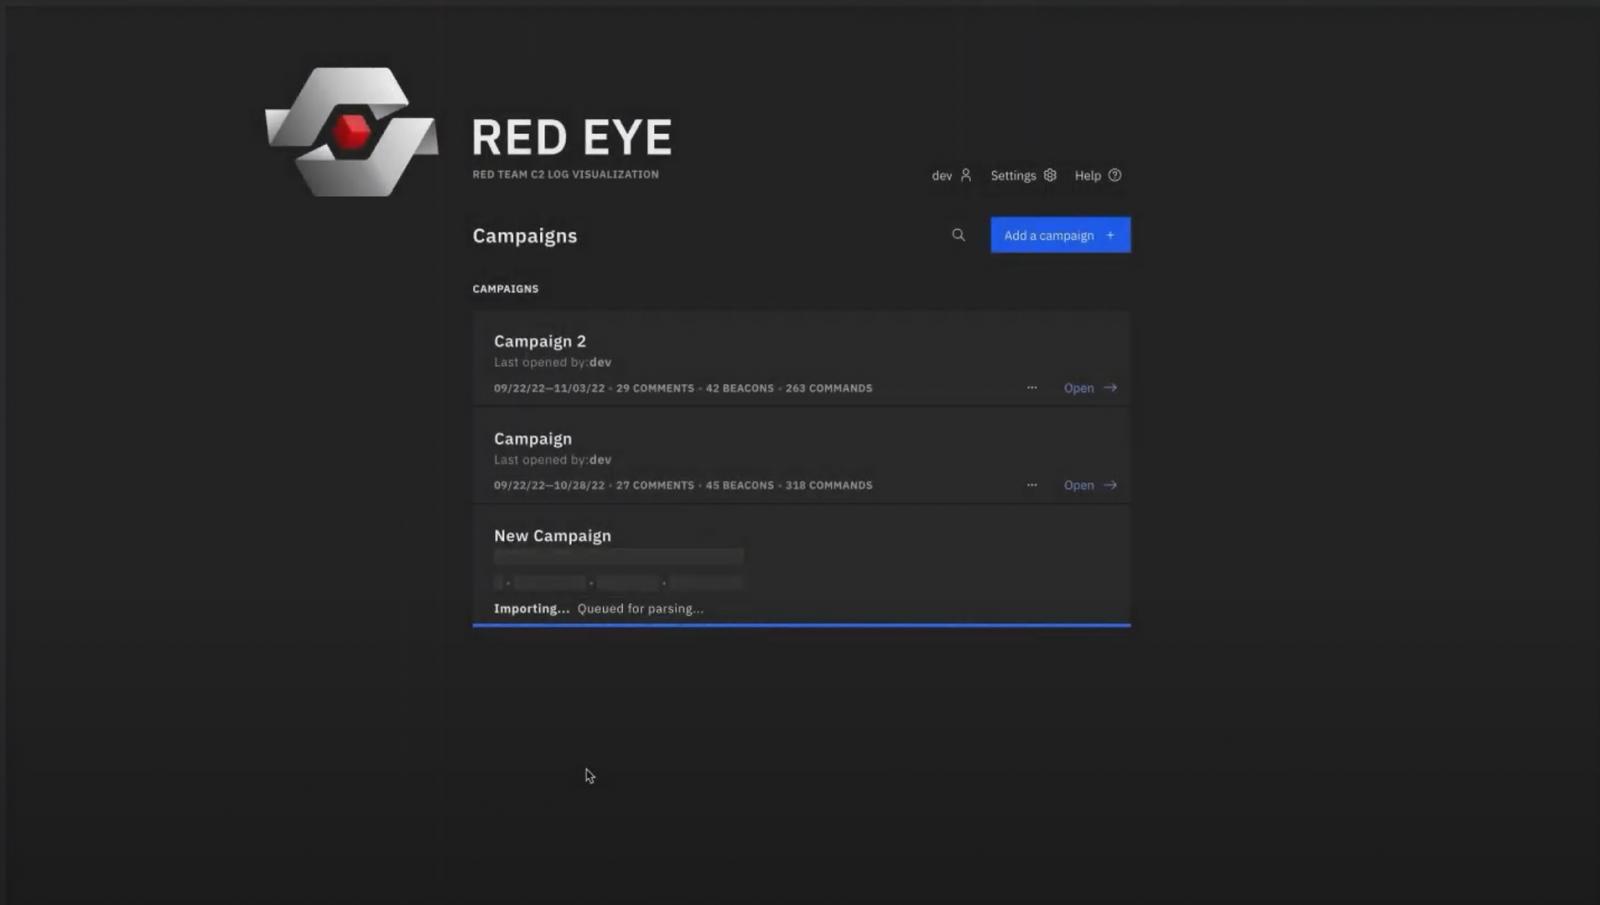 Campaign upload feature in CISA's RedEye tool